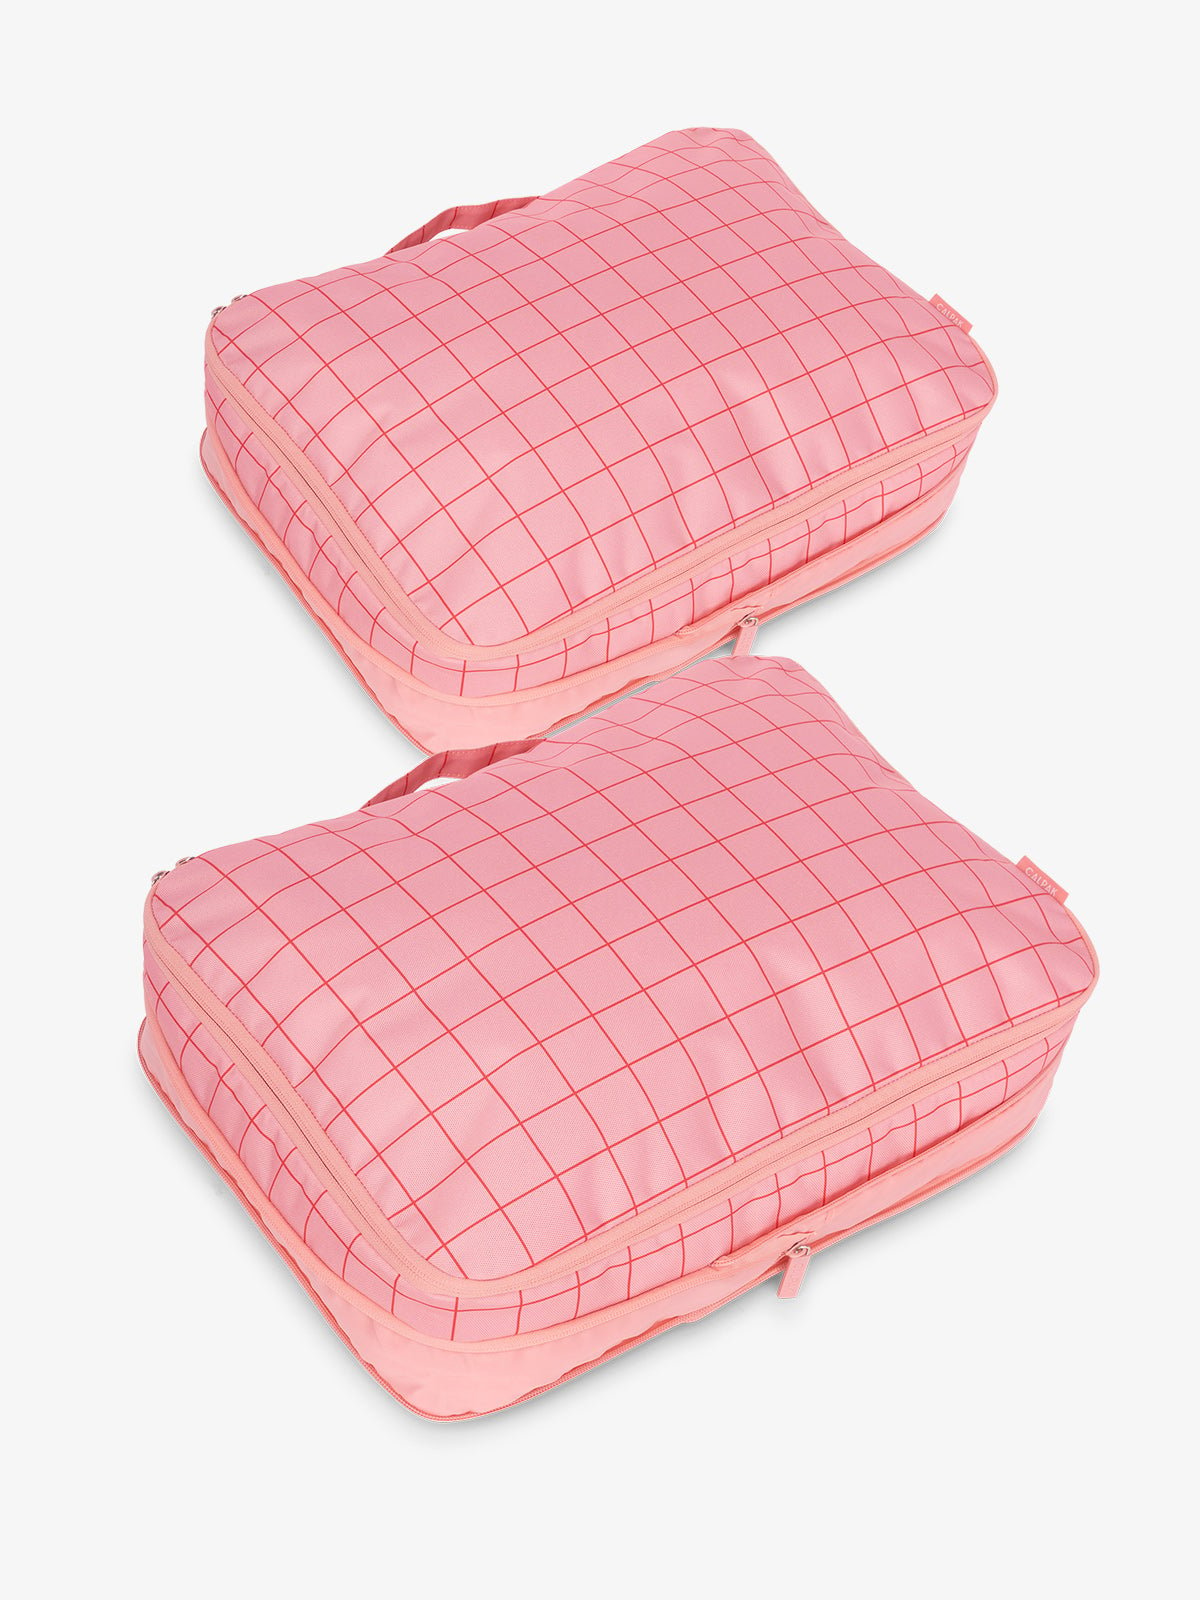 CALPAK large packing cubes with top handles and expandable by 4.5 inches in pink grid